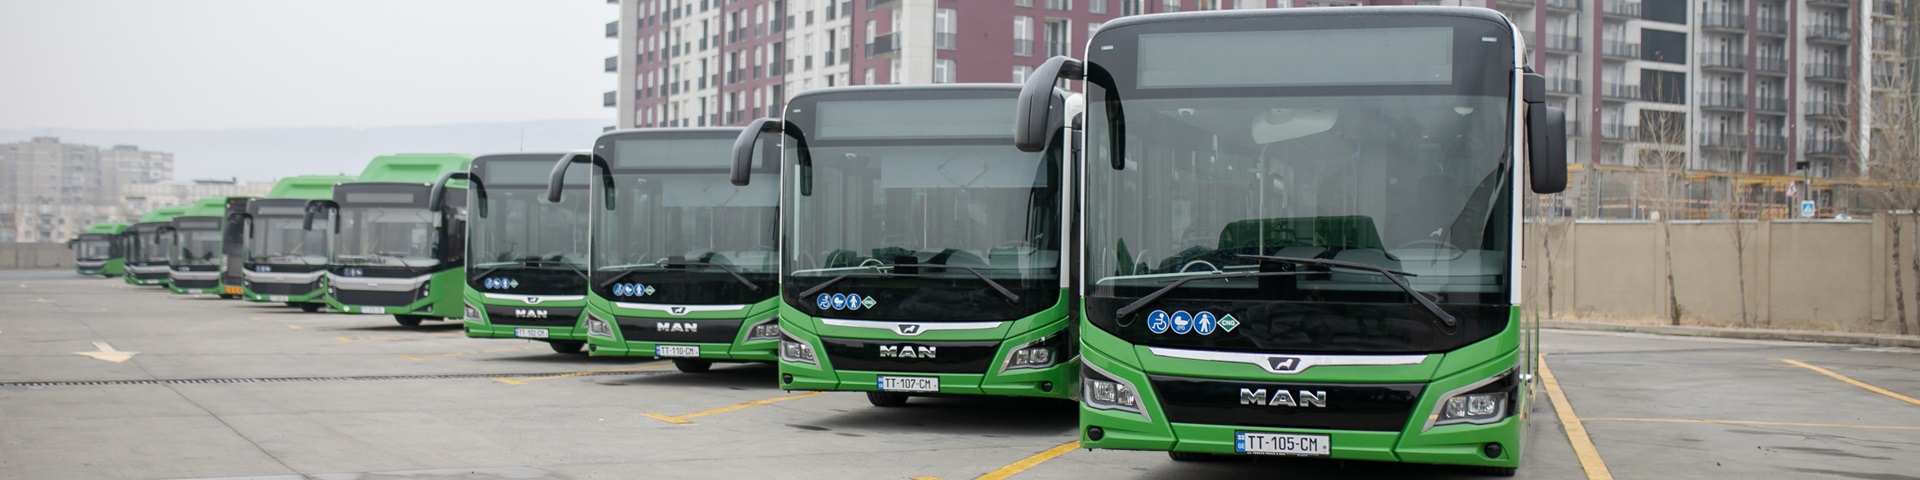 Brand new 18-metre-long green buses with Georgian number plates are parked in a row in a car park.